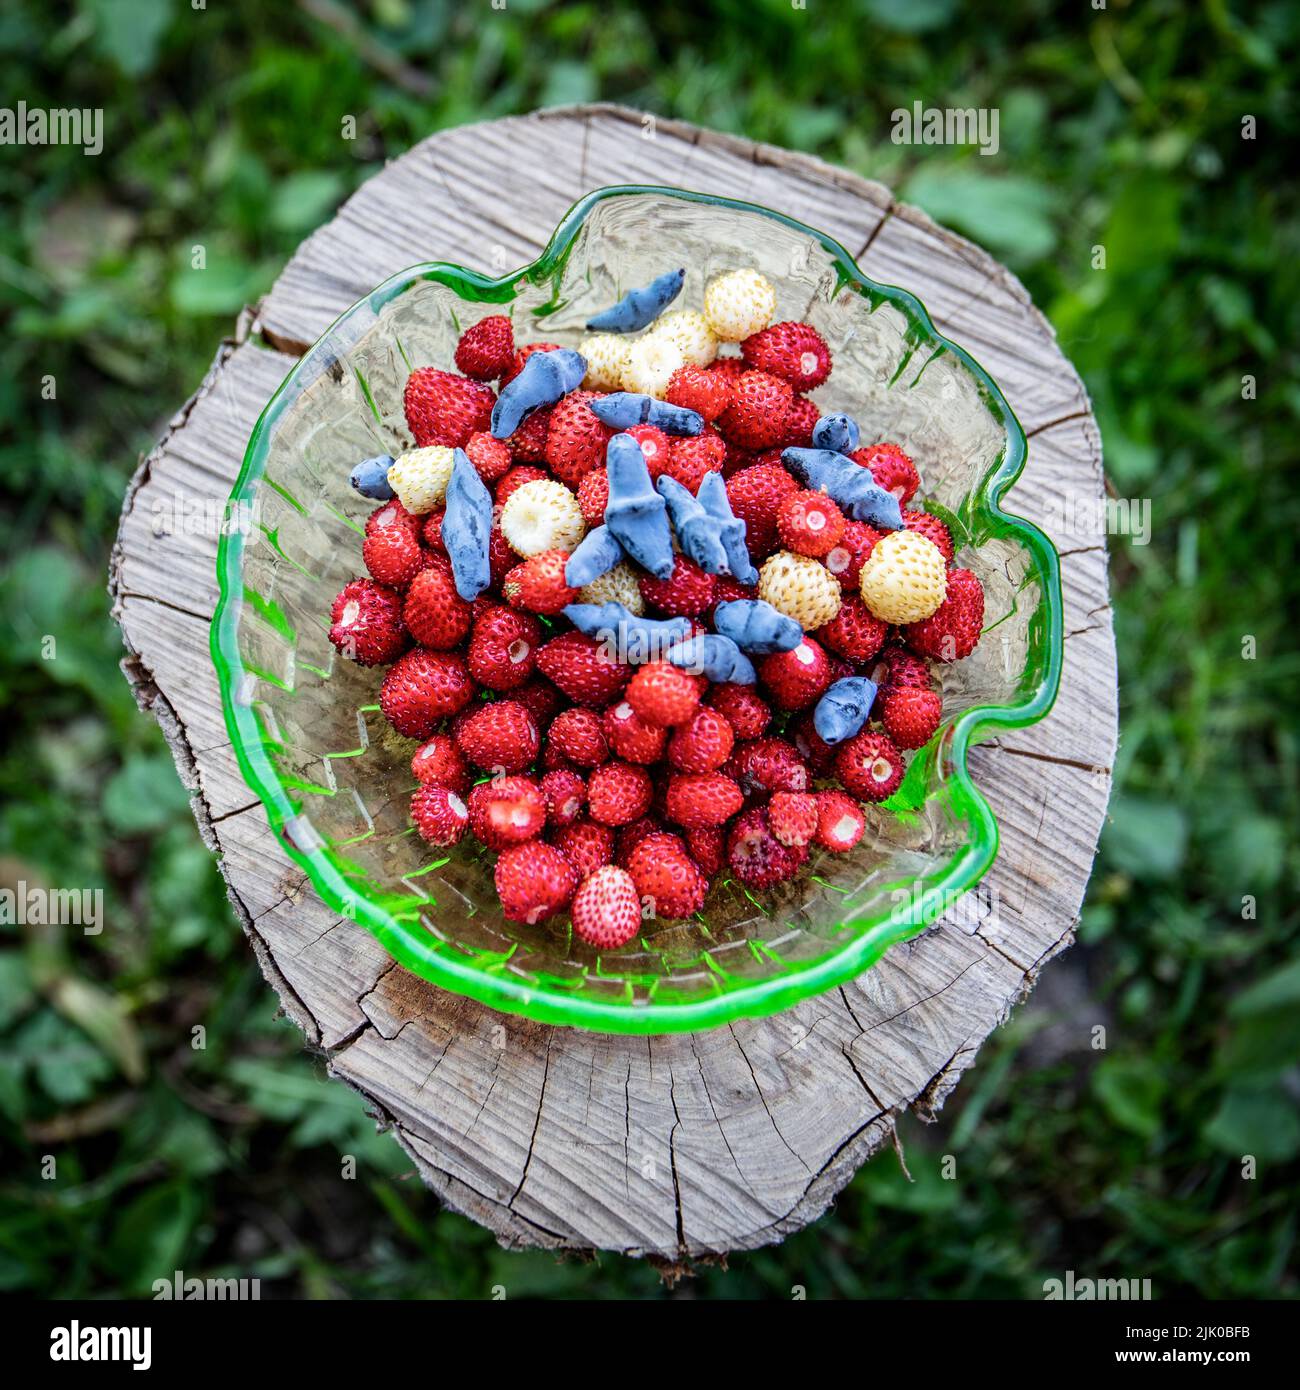 Wild berries in a uranium glass container. Strawberries and blue honeysuckle. Stock Photo